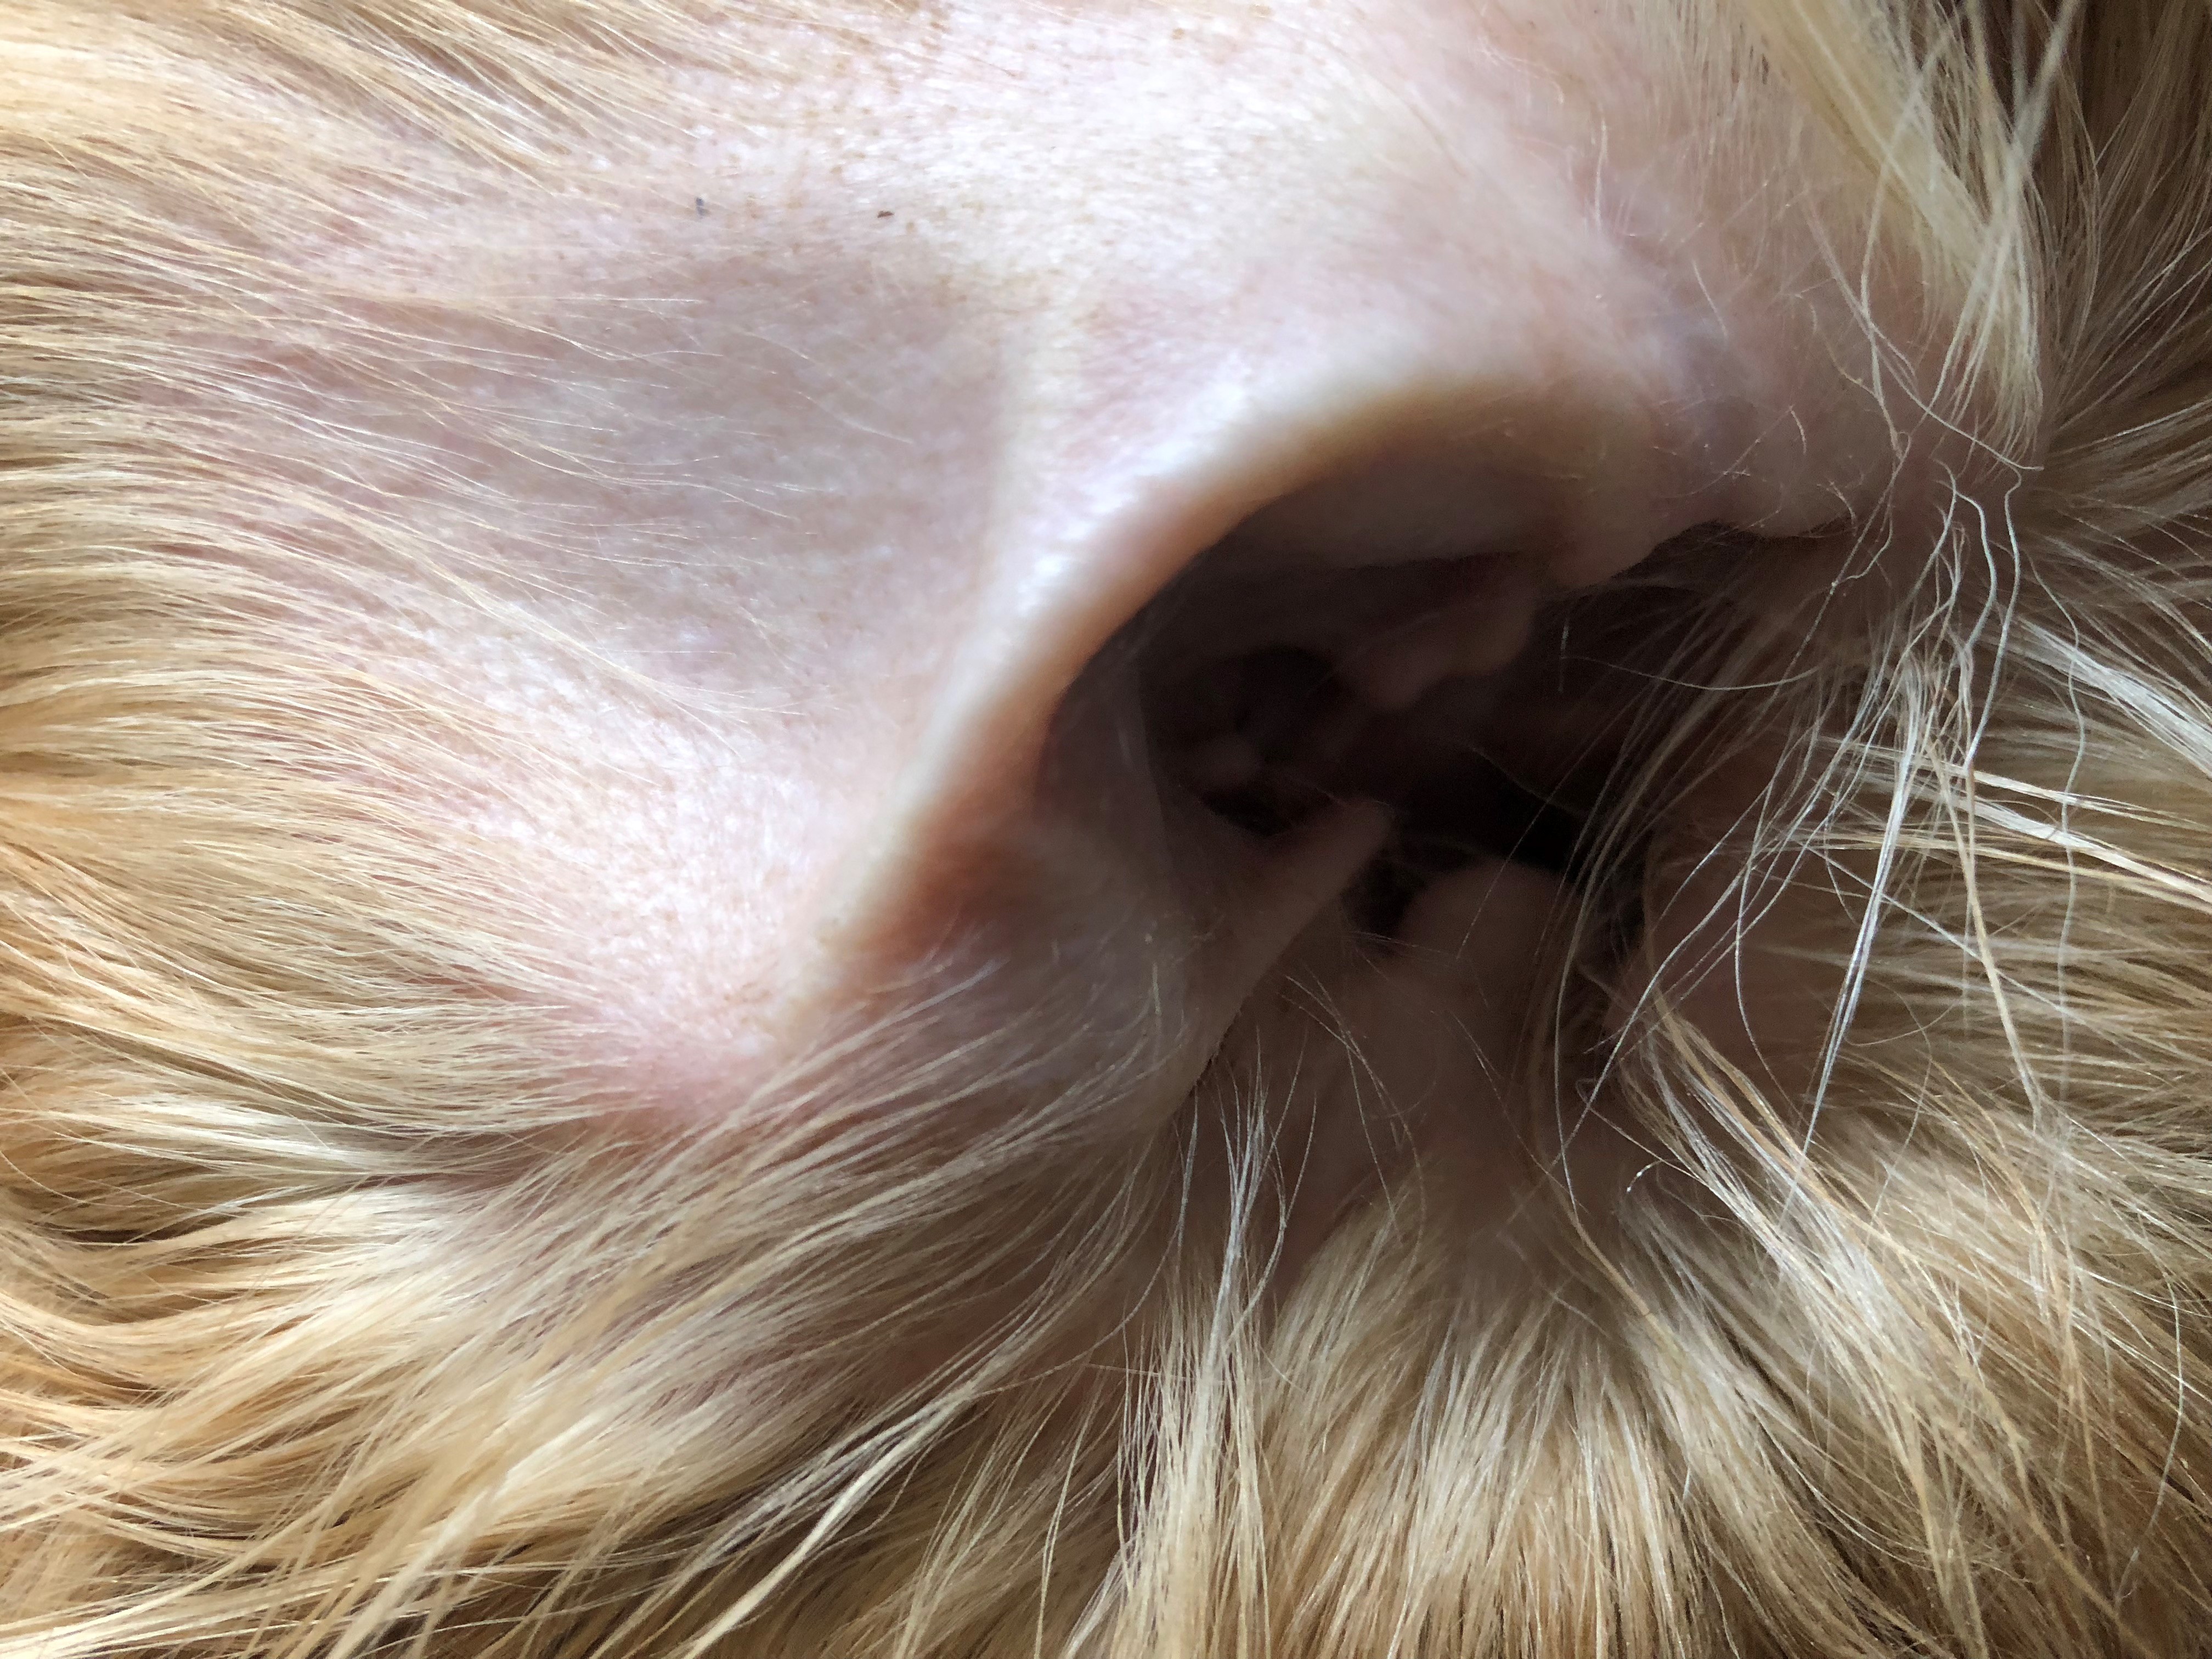 Dogs and ear infections